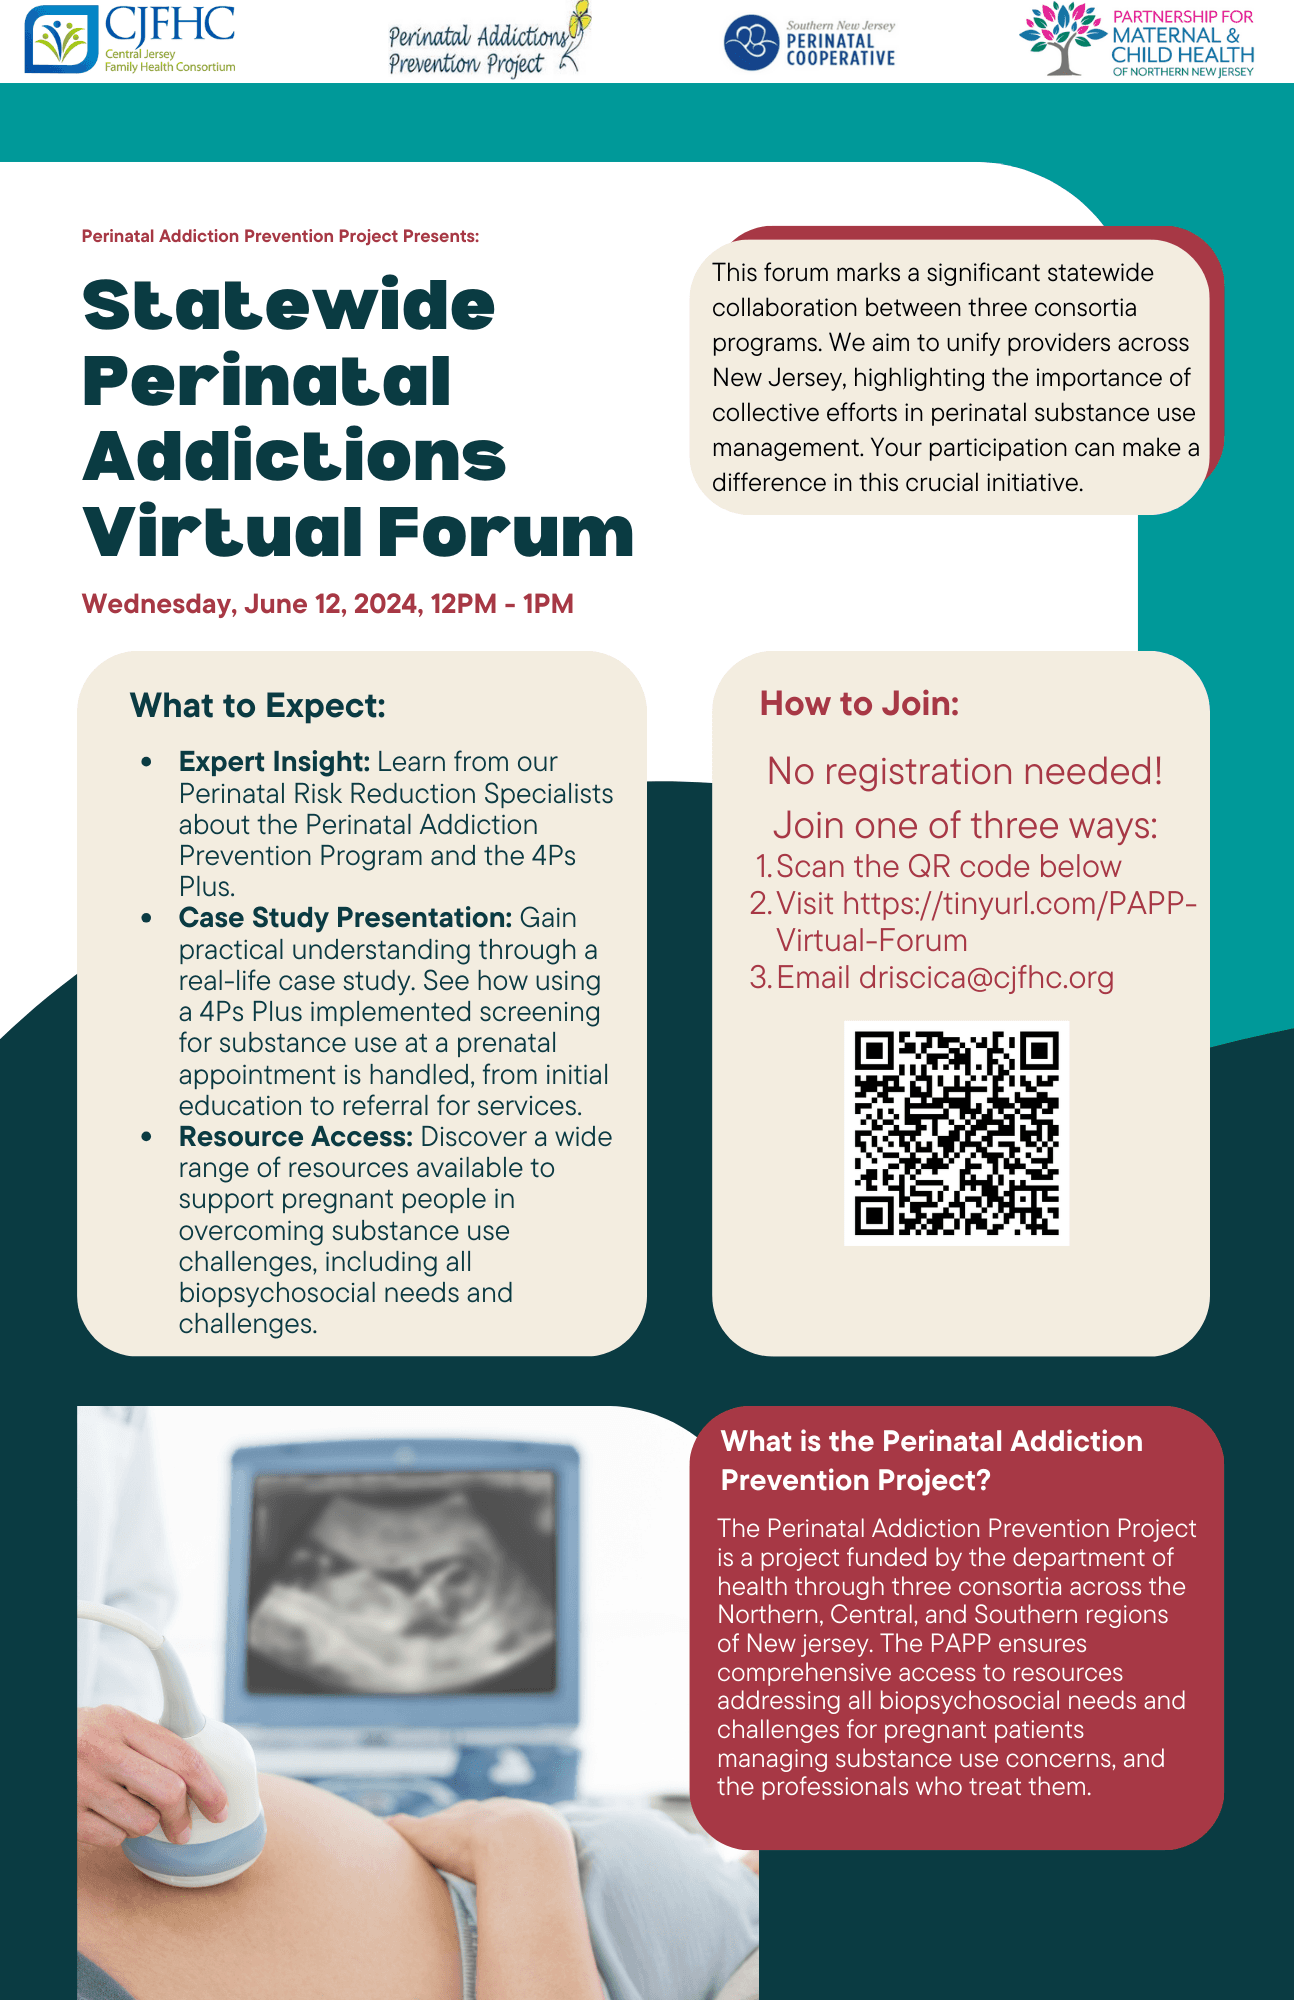 Join Perinatal Addiction Prevention Project’s Statewide Virtual Forum on Perinatal Substance Use